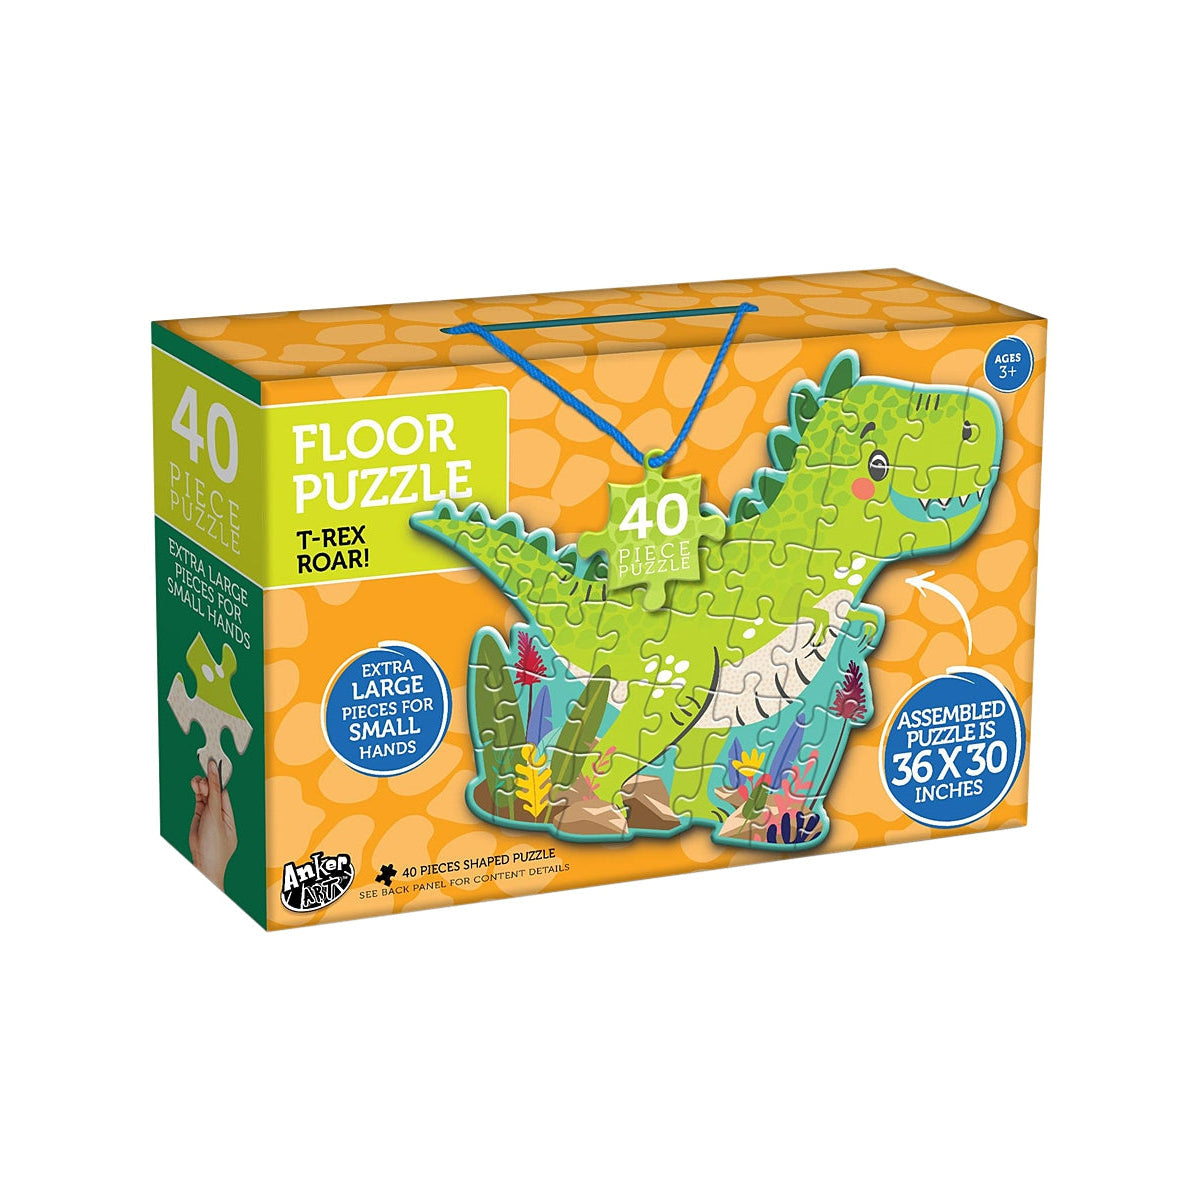 Anker Play 40 Piece Shaped Floor Puzzle - T-Rex Roar-Anker Play Products-Little Giant Kidz